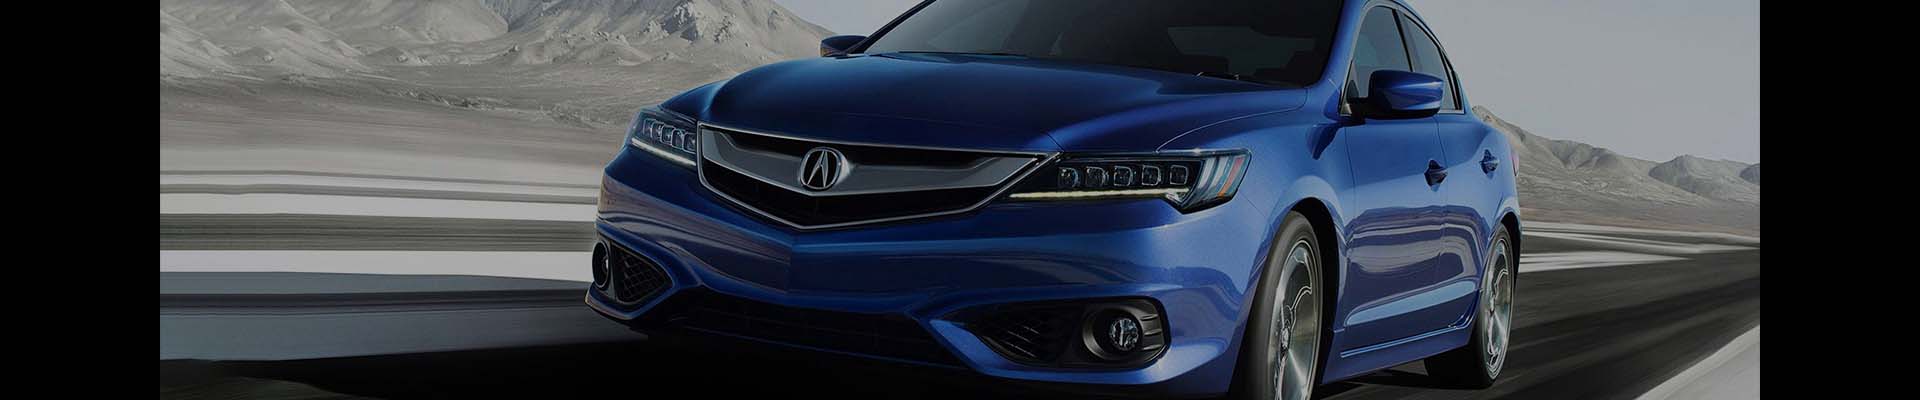 Shop Genuine OE Parts for Acura